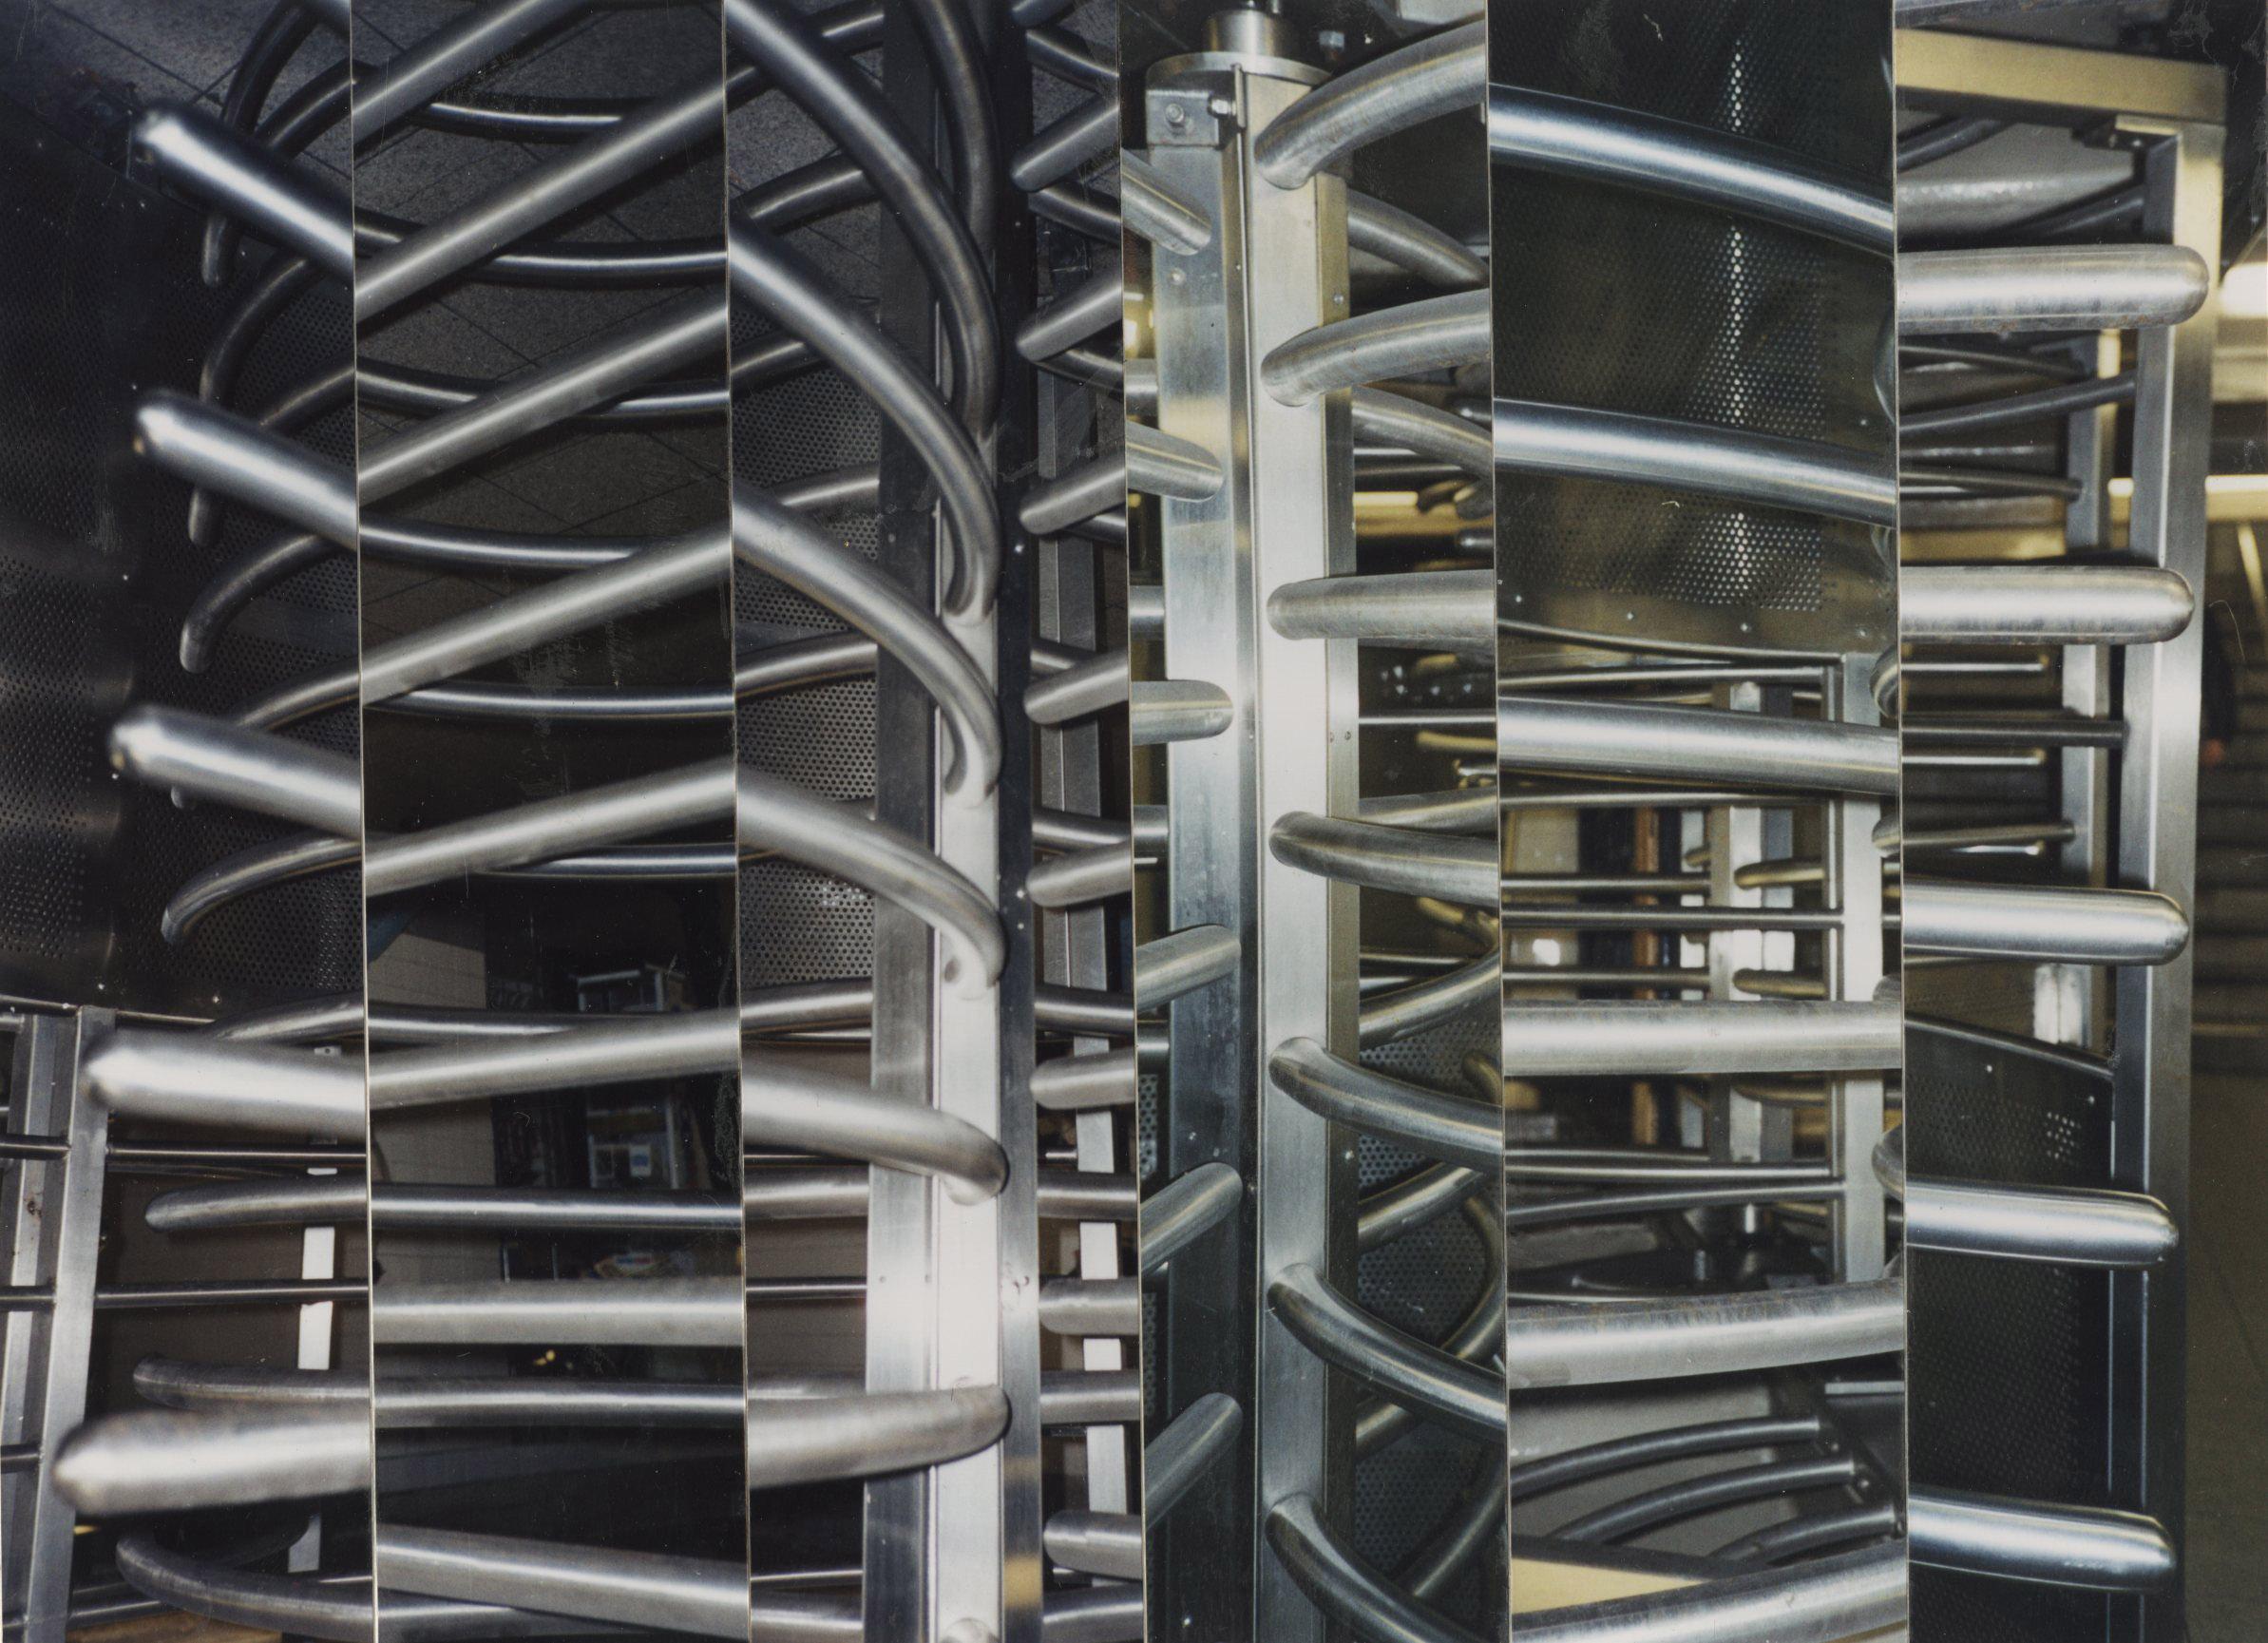 Peter Marks Abstract Photograph – Ohne Titel (Subway Turnstiles)